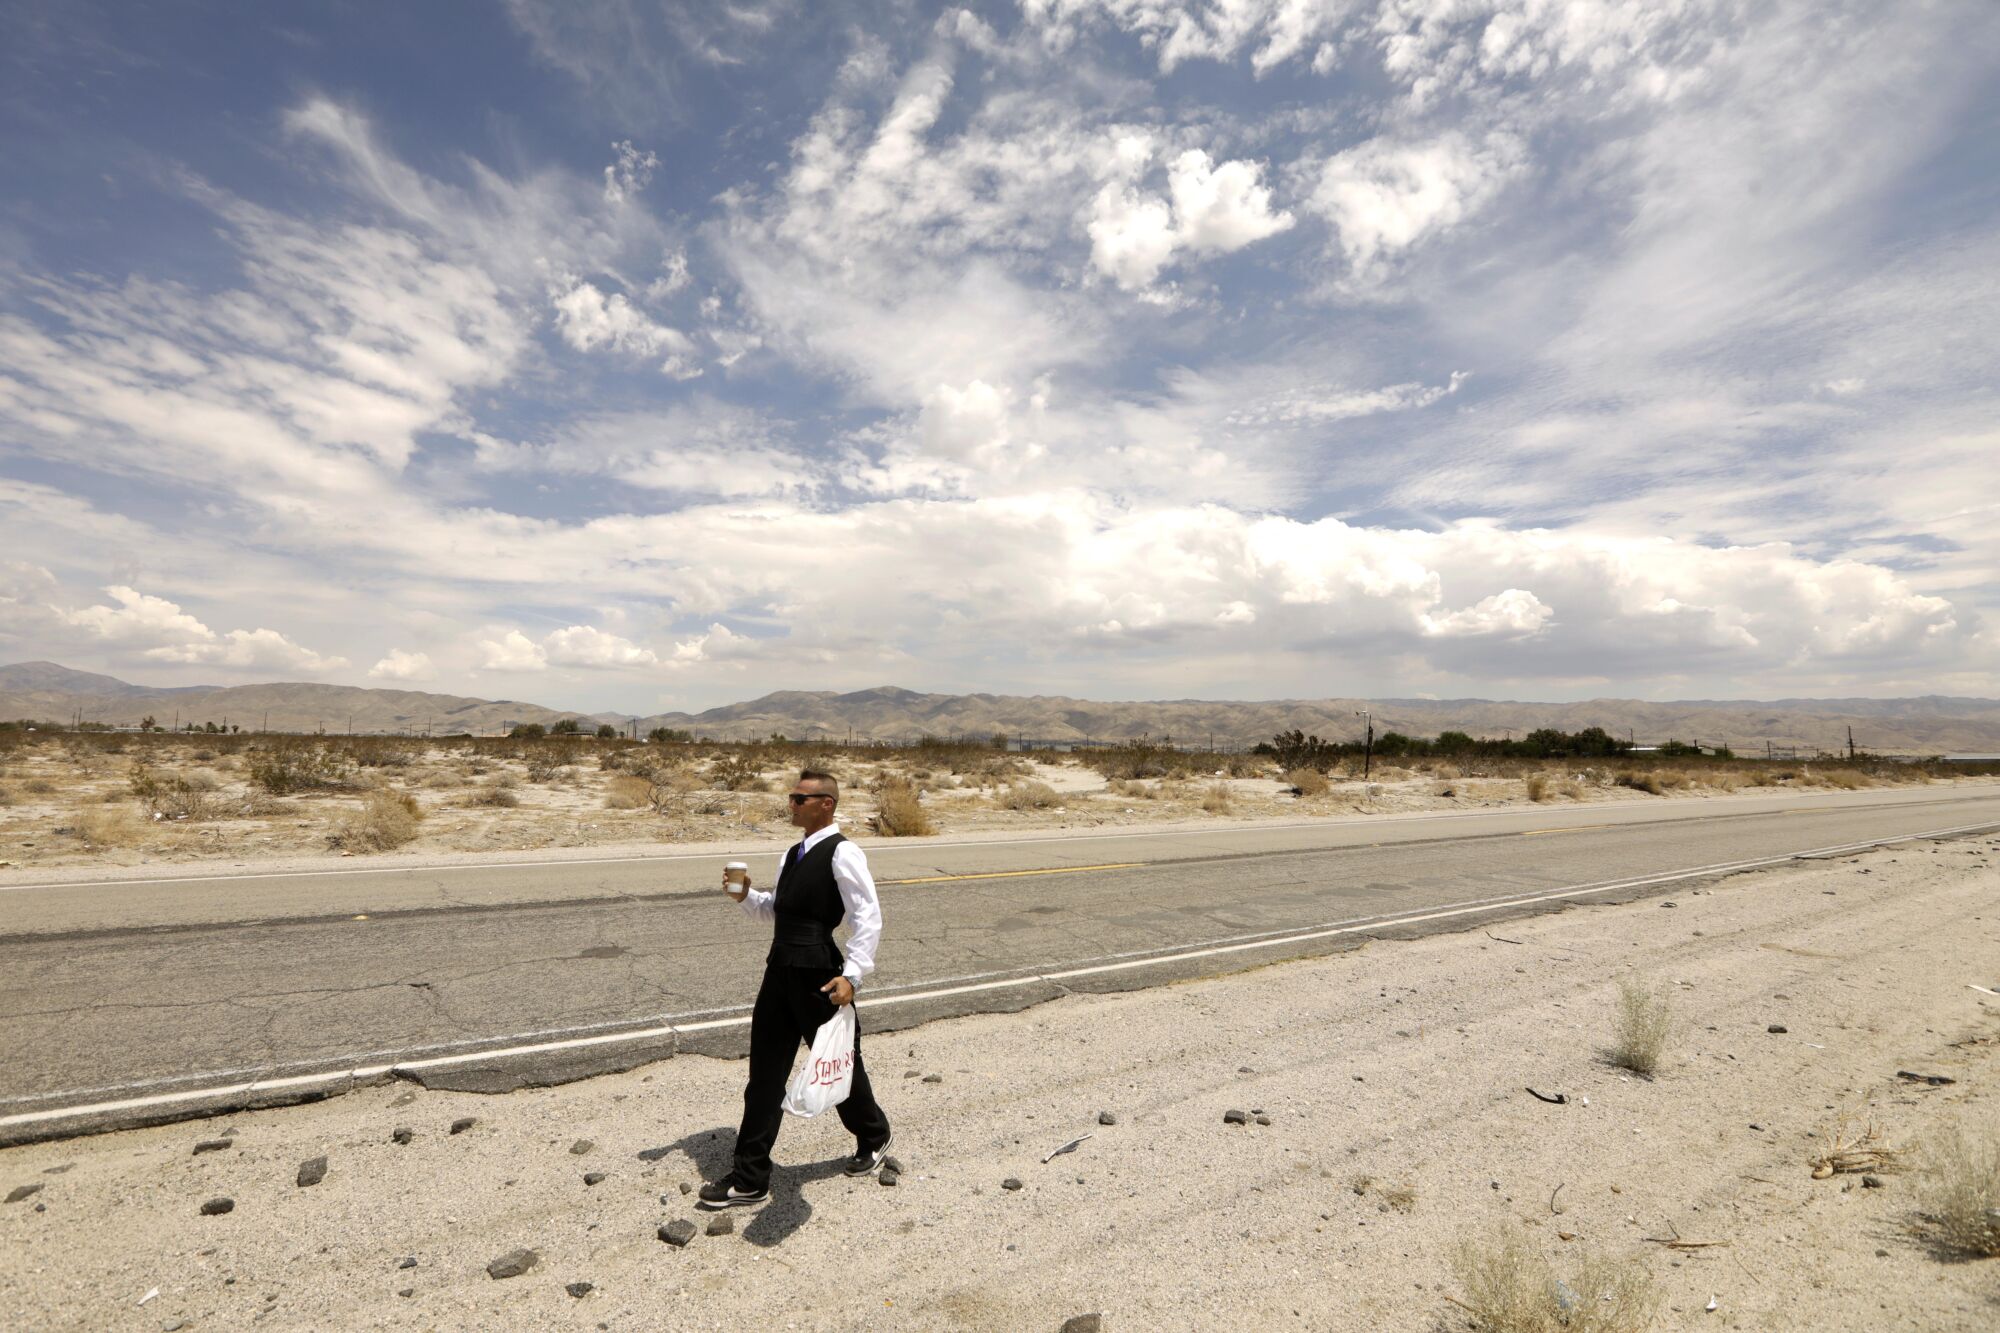 July 27: Roger Embrey walks to a job interview along a road in the desert with clouds in the sky